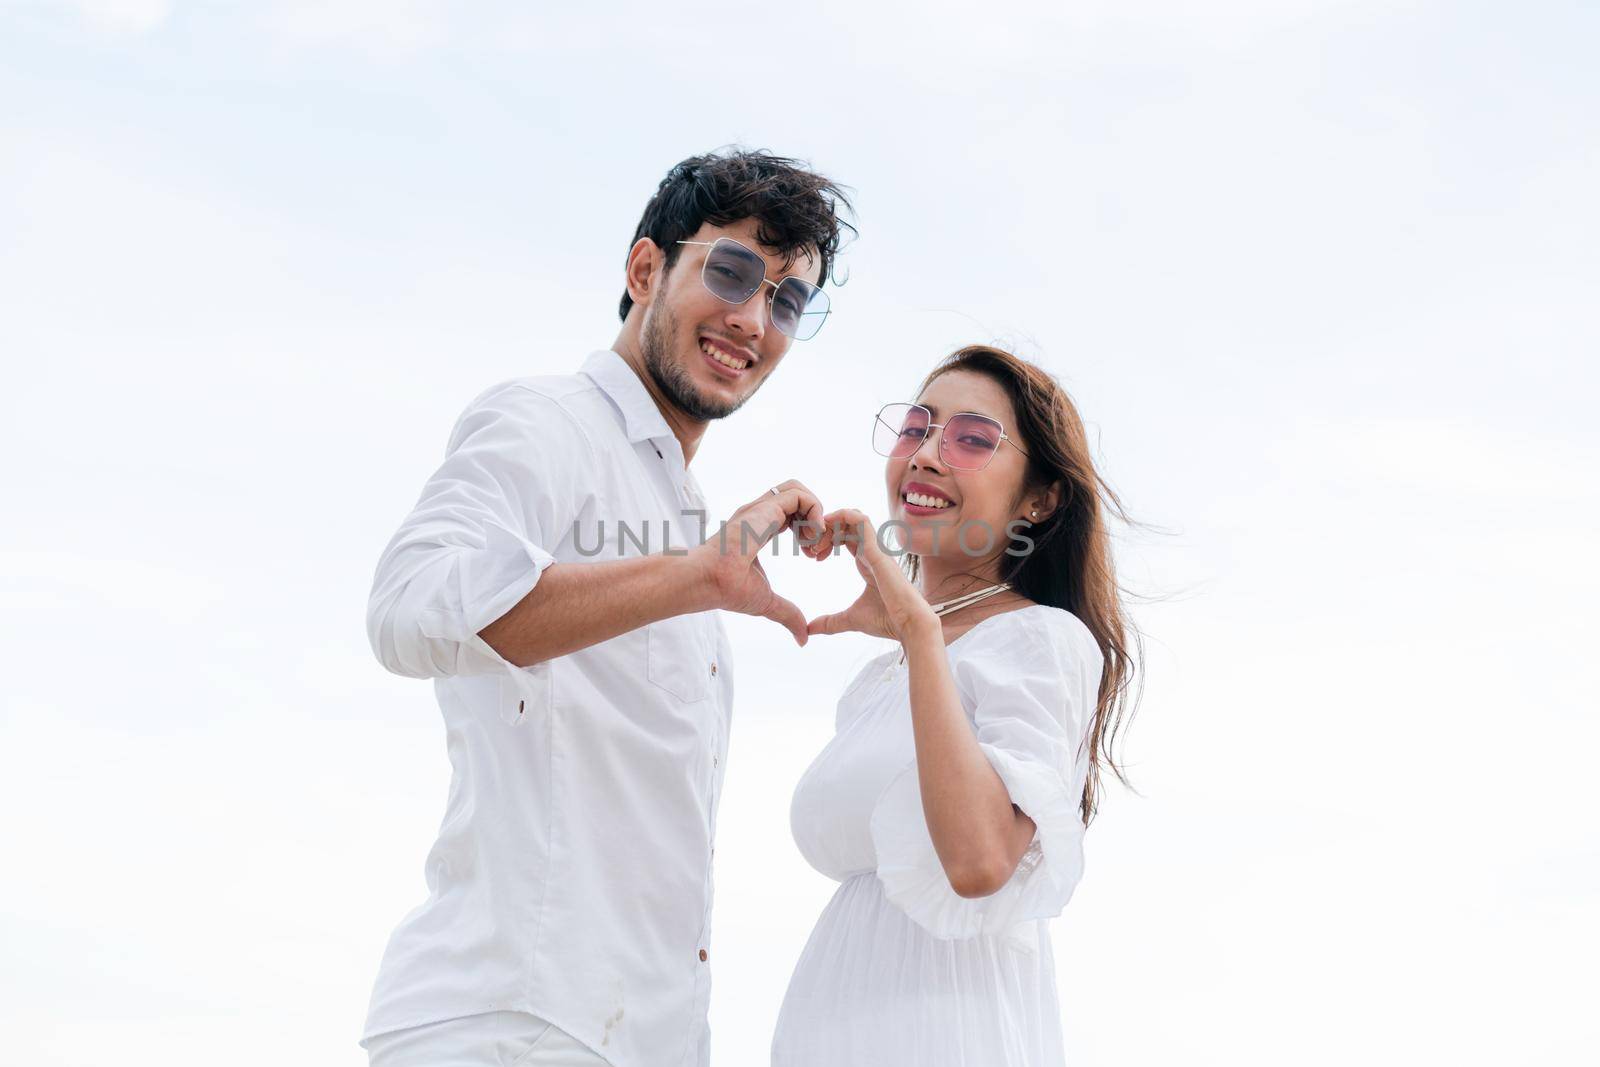 Young couple shows heart shape hand gesture on the beach in summer.